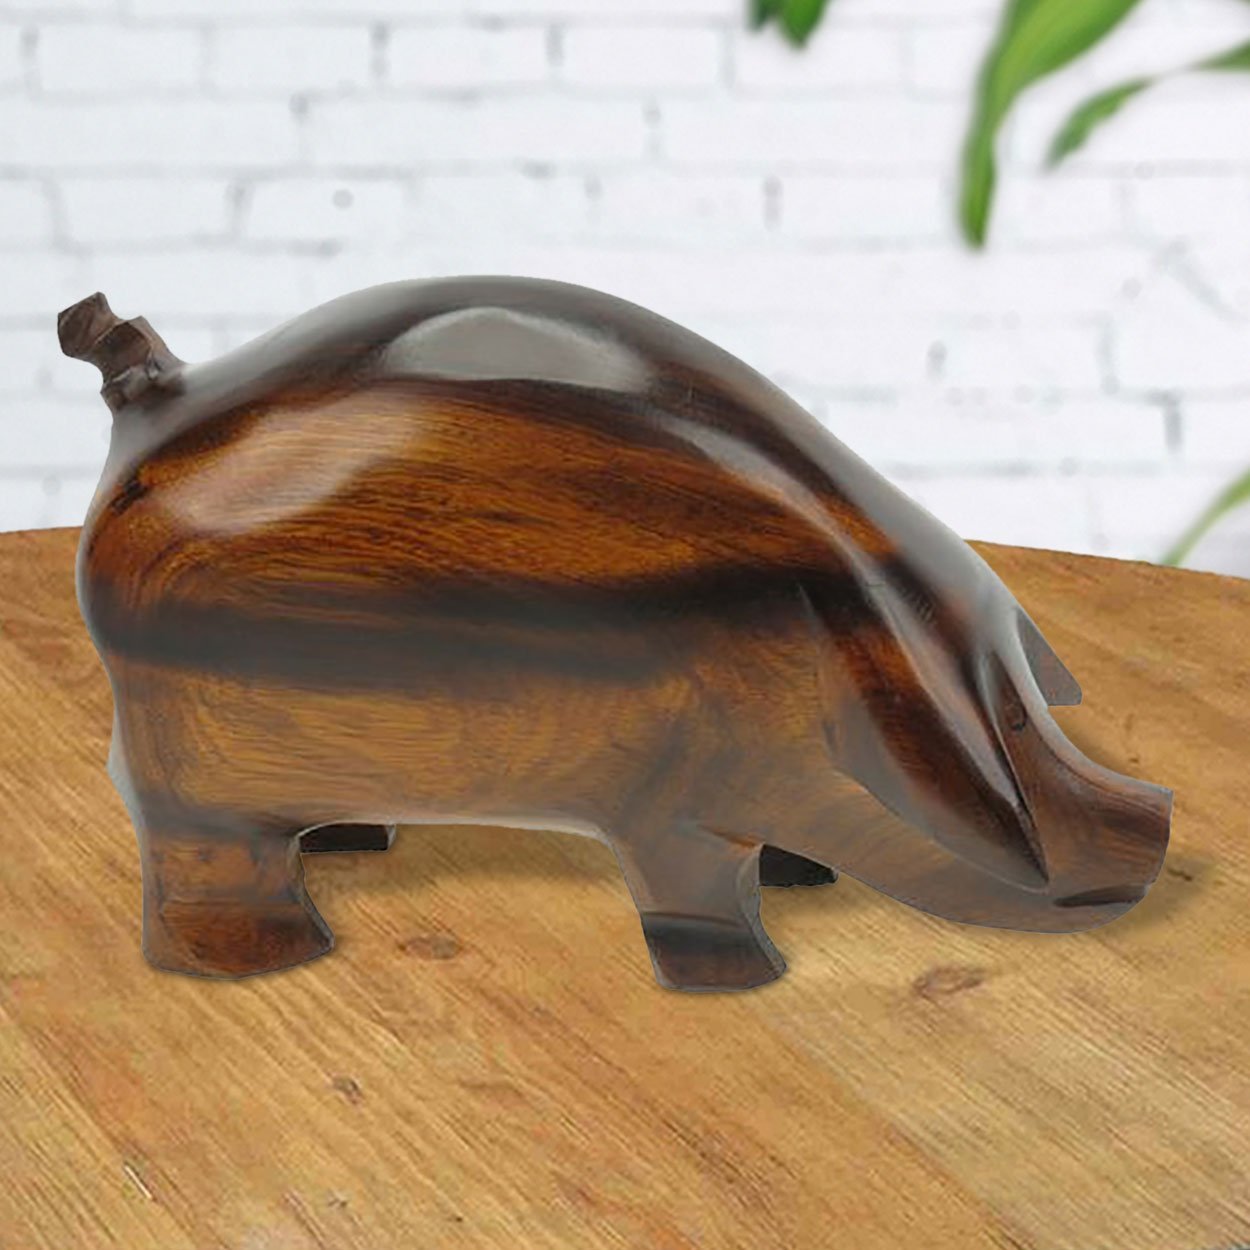 172214 - 6-7in Long Pig Ironwood Carving